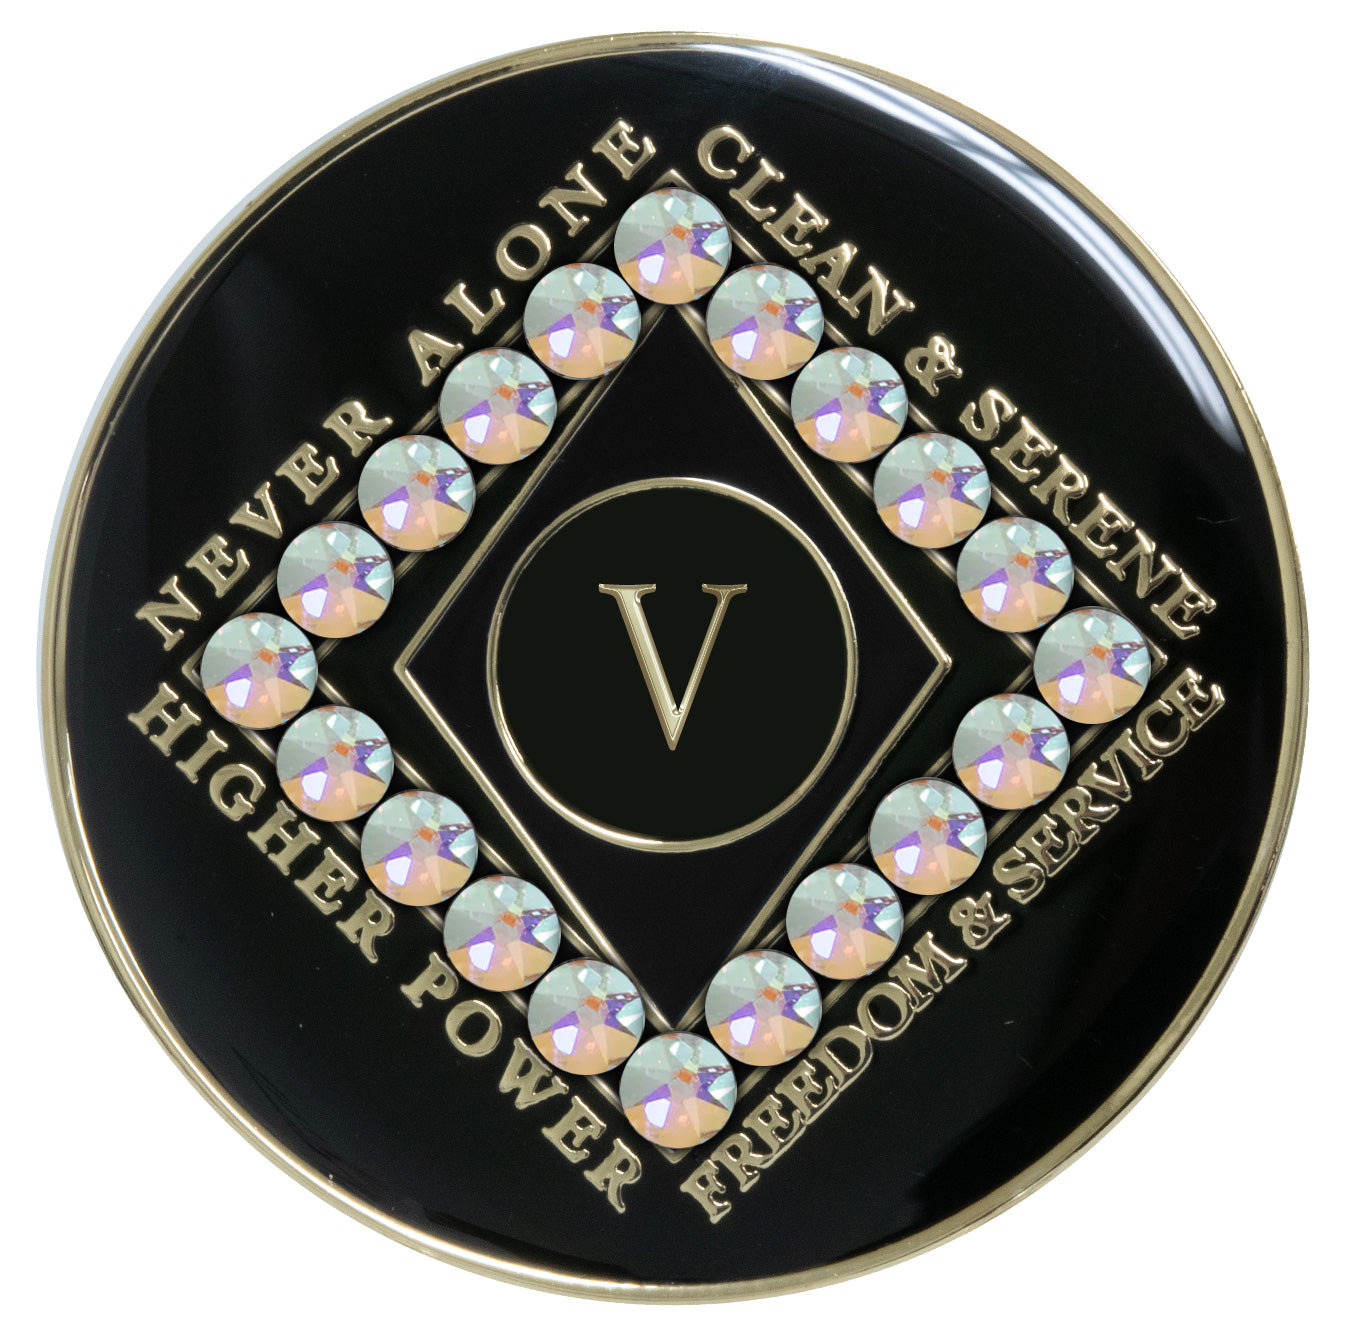 Clean Time Recovery Medallion with Bling Crystal AB